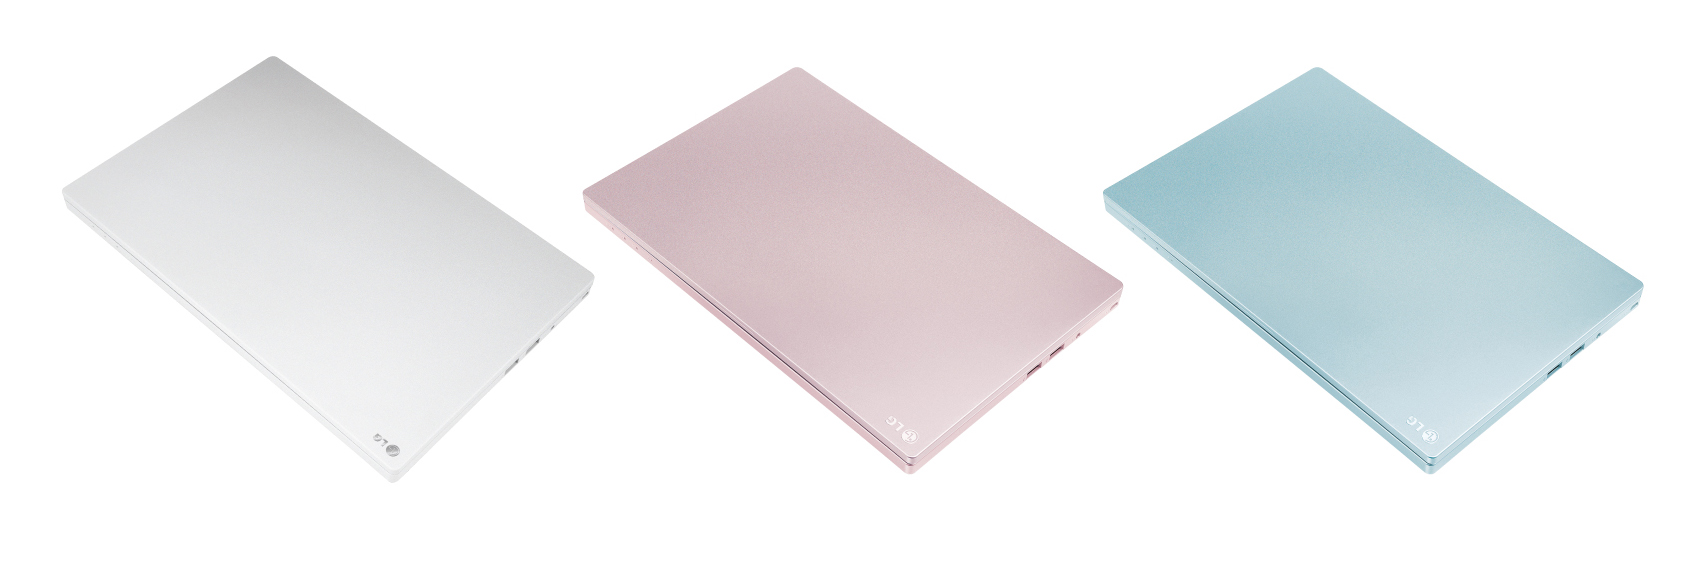 LG premium notebook model P220 with its display closed in White Pearl, Pink Pearl and Blue Pearl